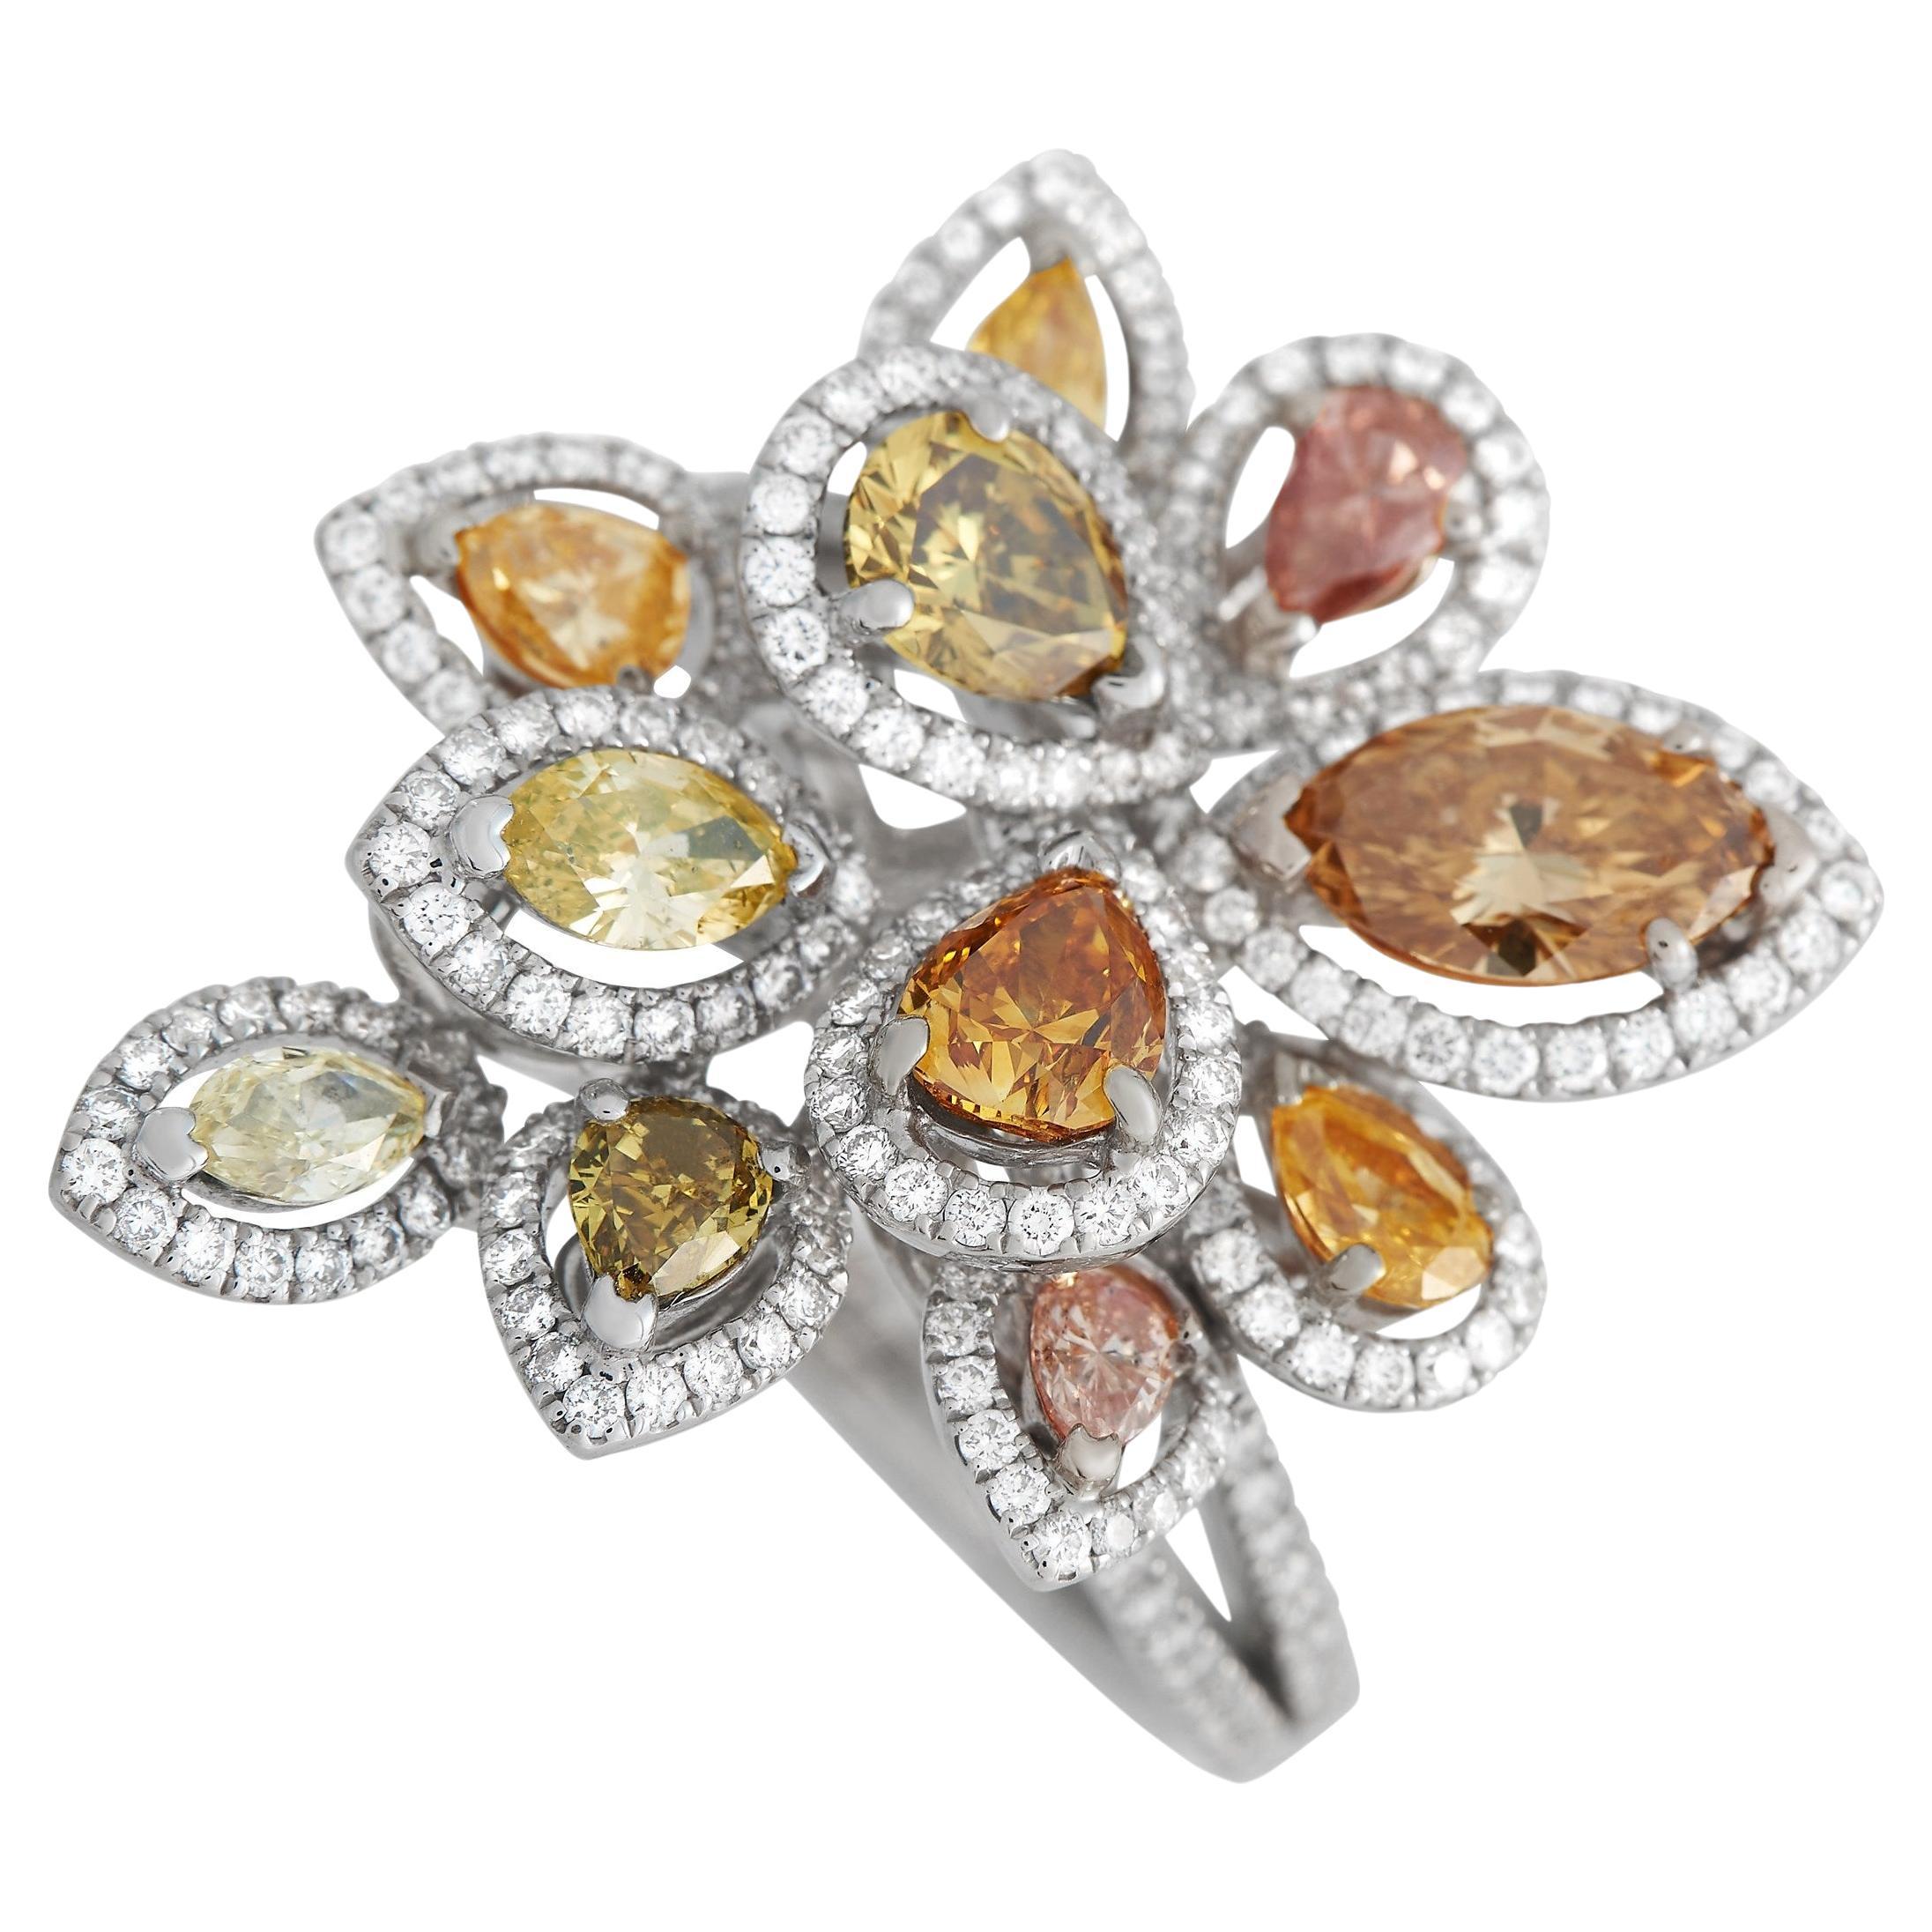 De Beers 18K White Gold White and Multi-Colored 4.25 Ct Diamond Ring